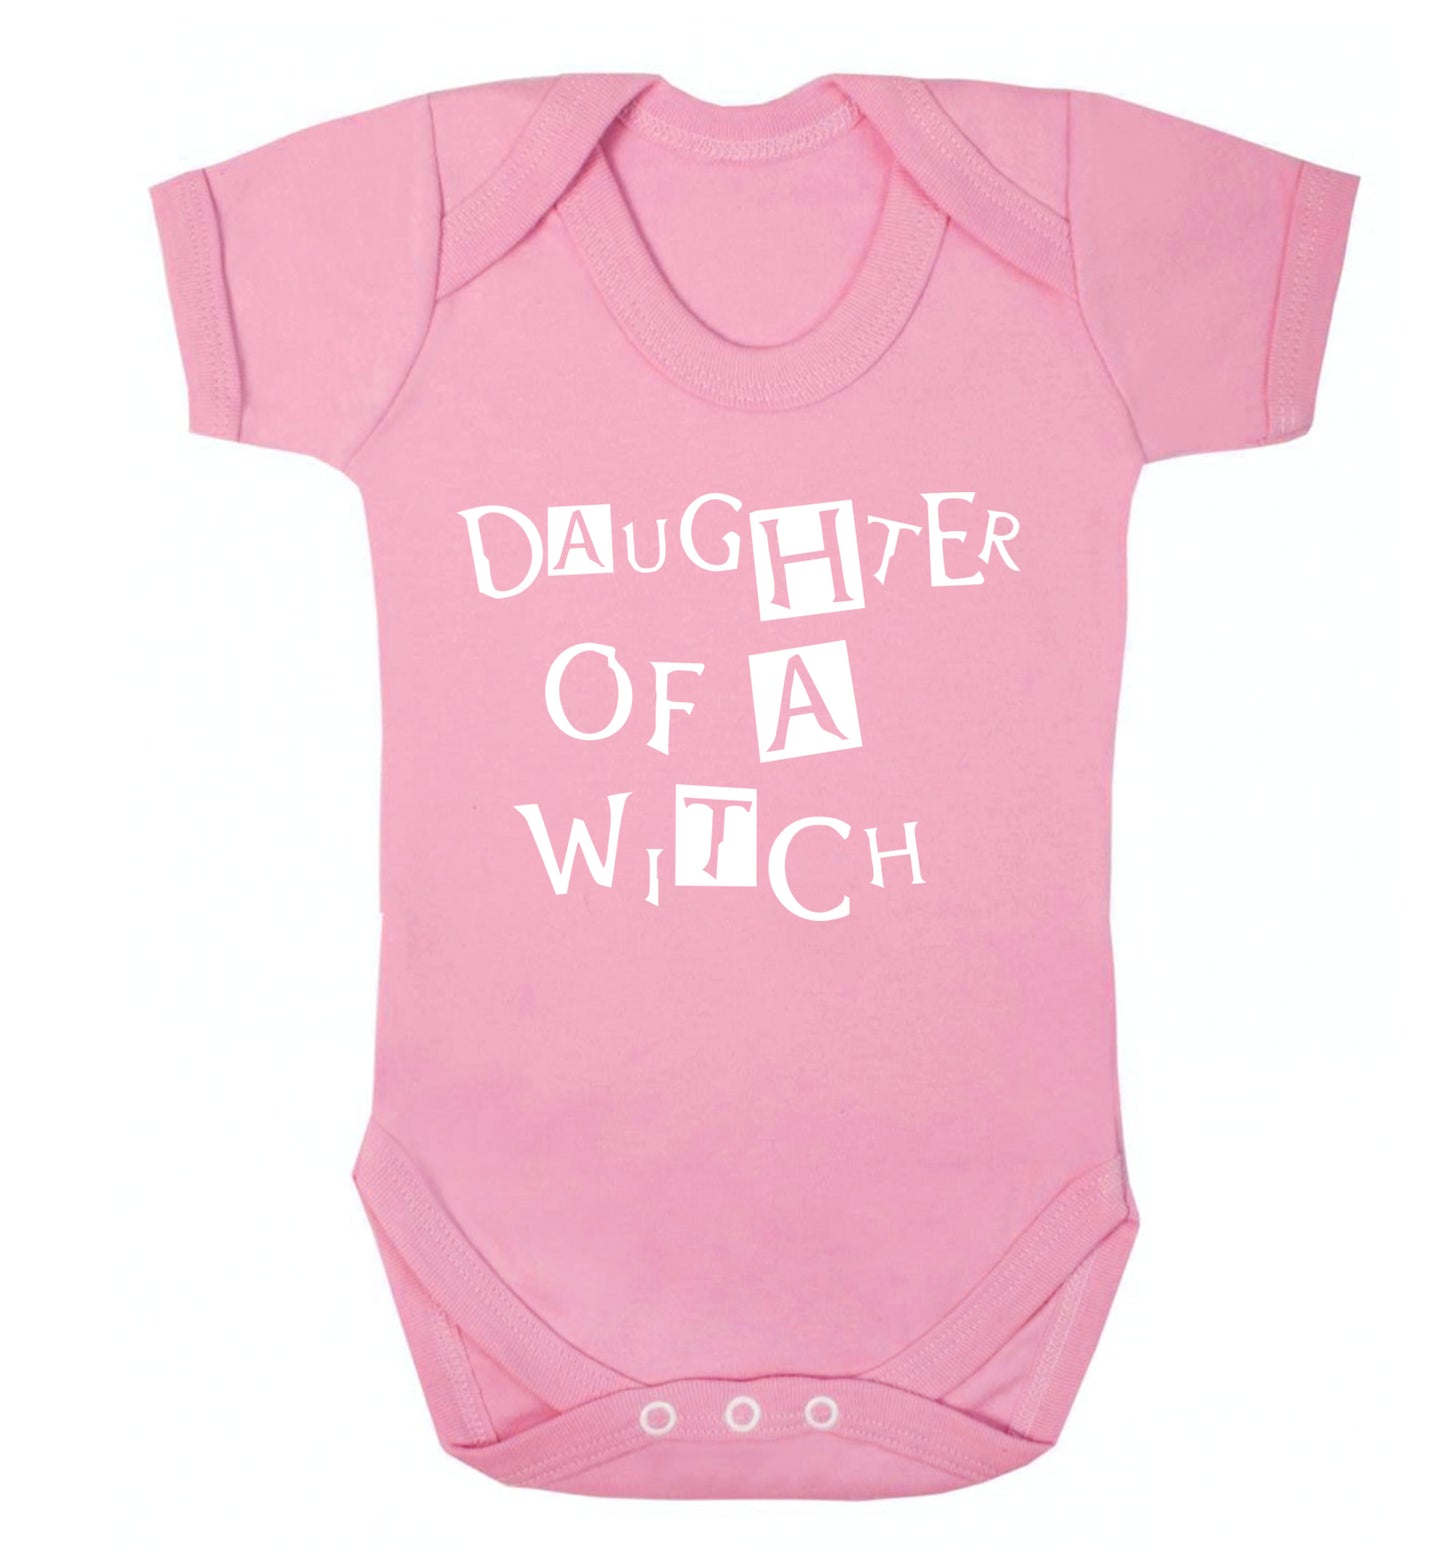 Daughter of a witch Baby Vest pale pink 18-24 months